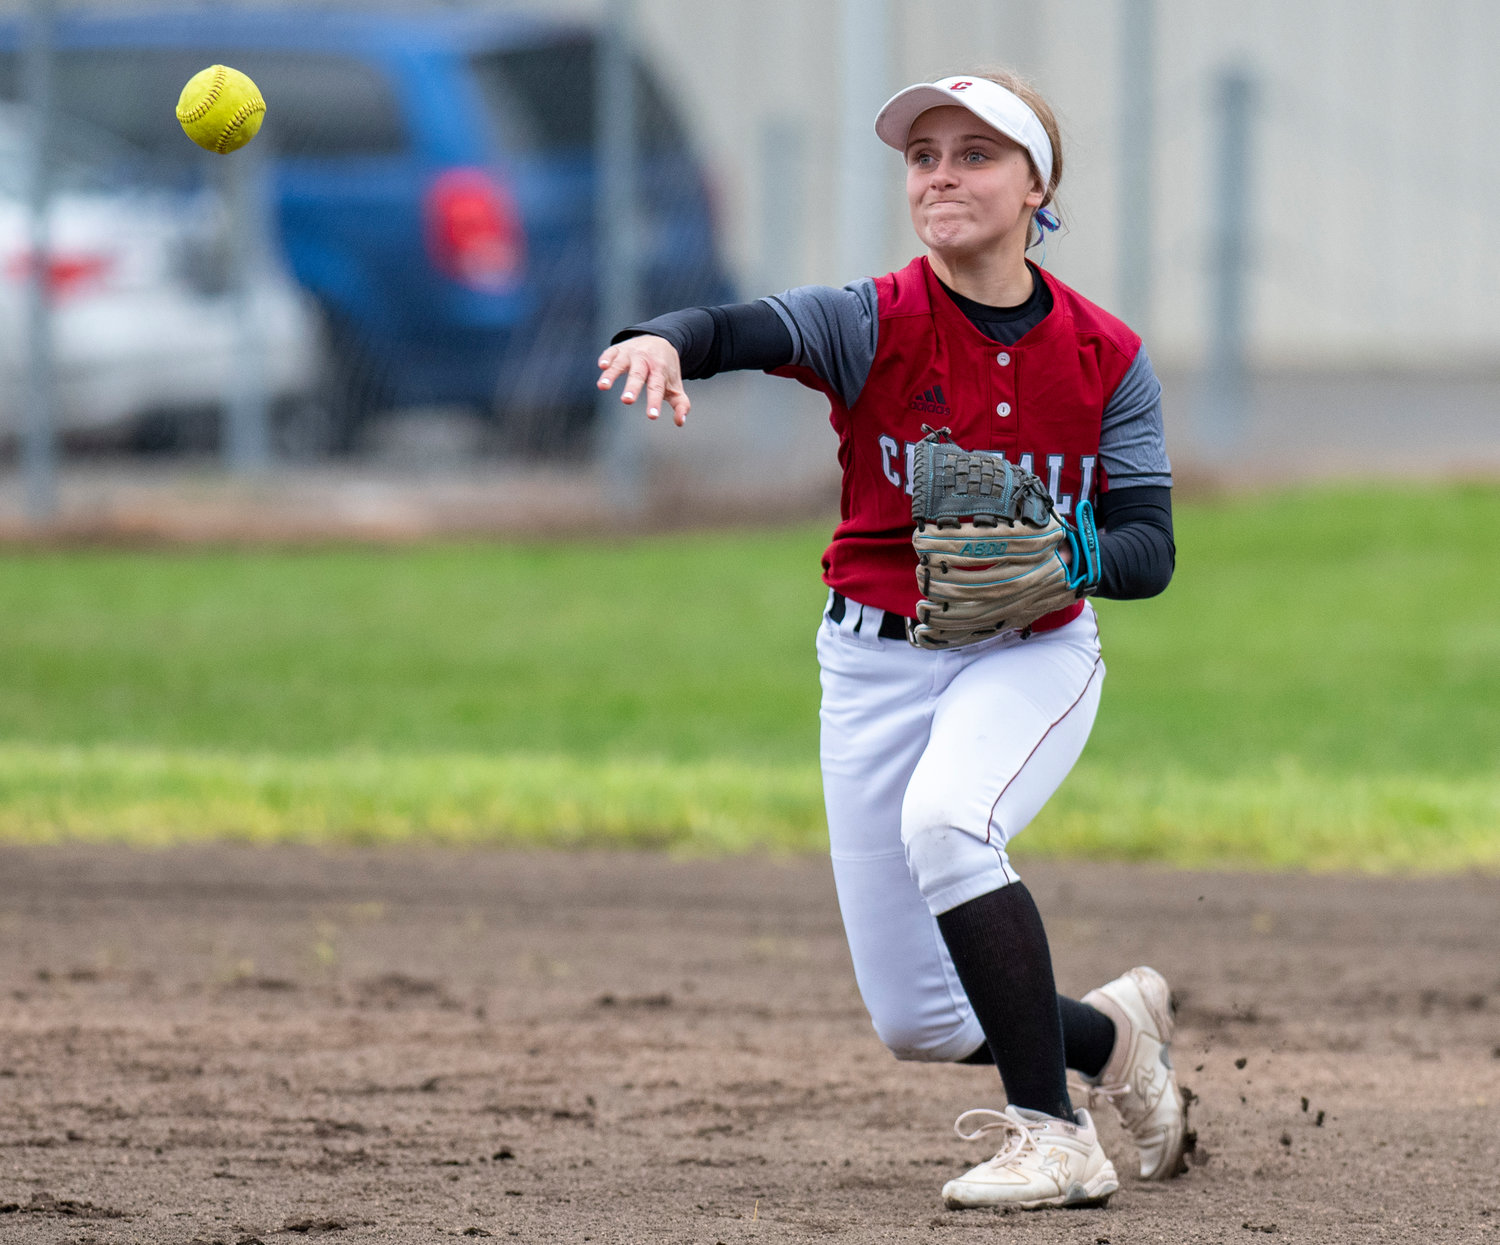 W.F. West shortstop Avalon Myers makes a throw to first base during a road game against Tumwater on May 2.